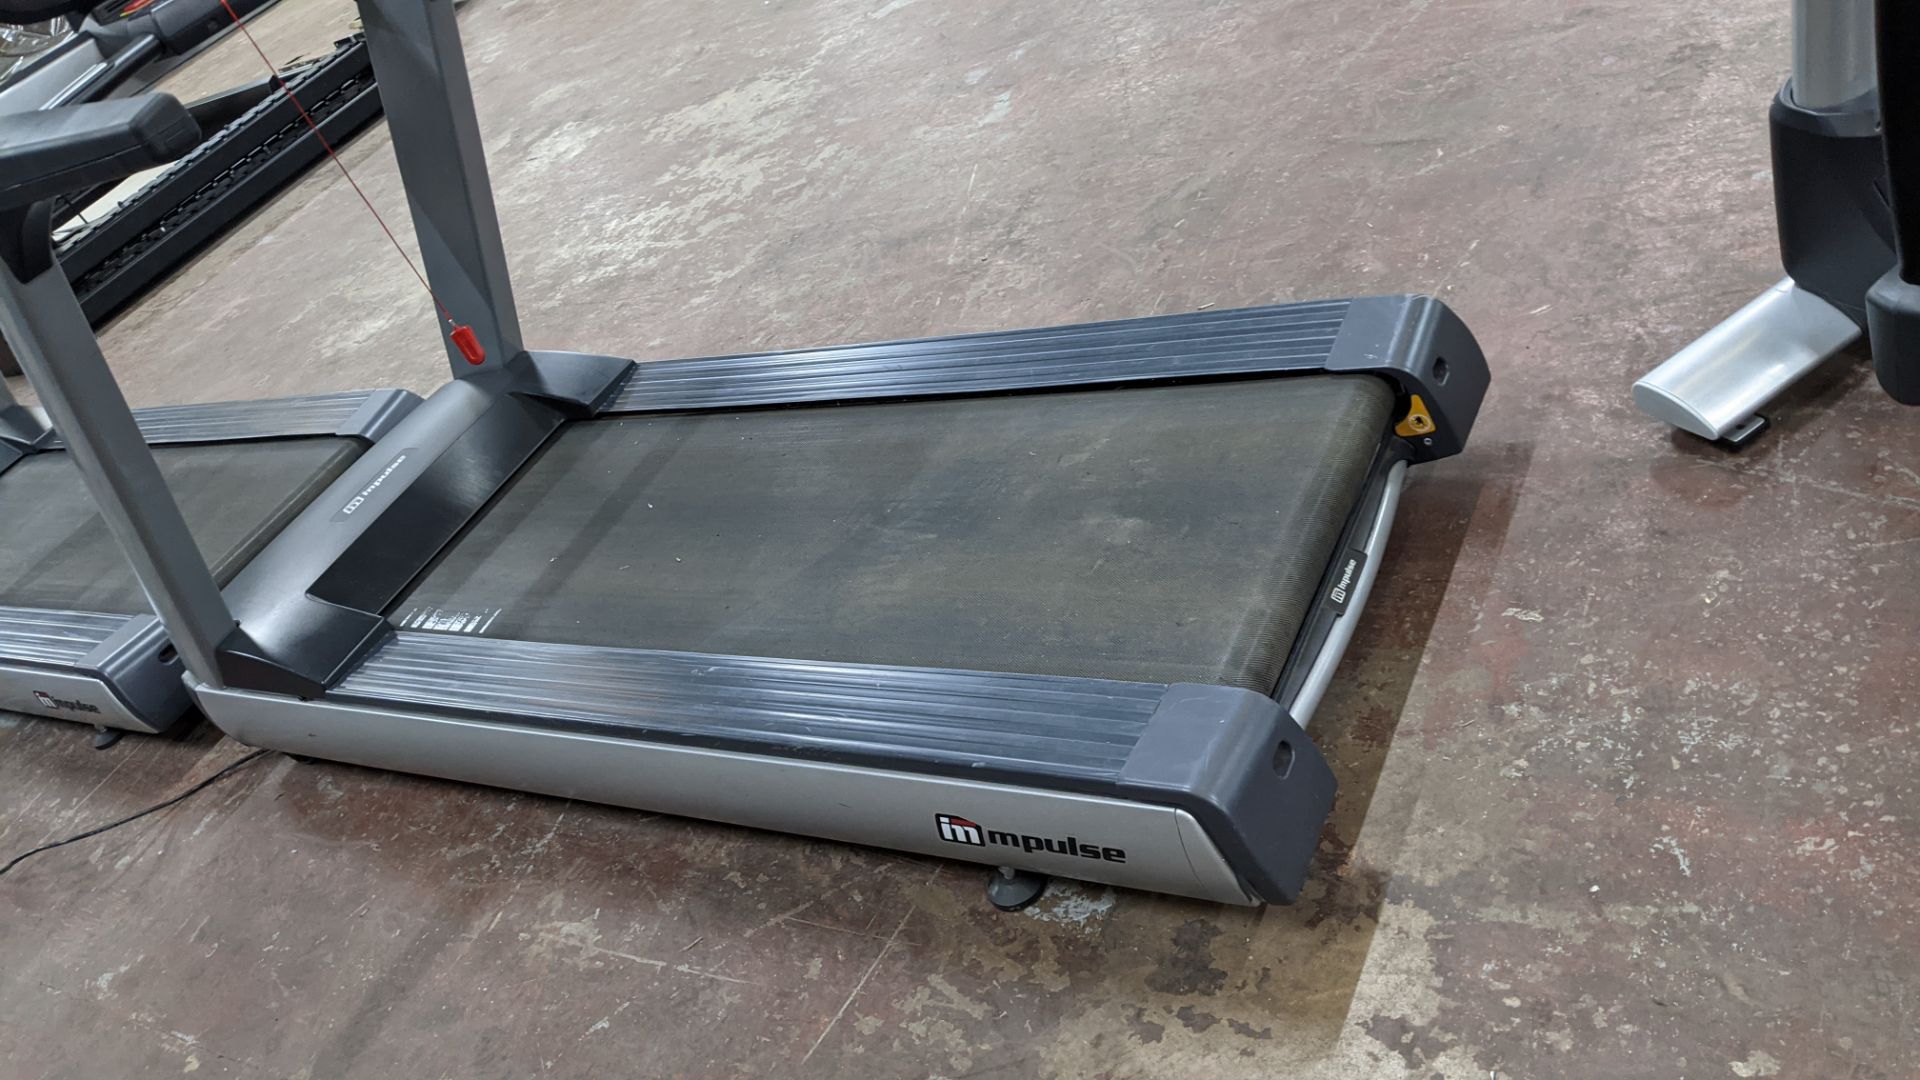 Impulse RT500H Treadmill, max. incline 15°, wide running surface of 22". Low step height 8.5". Weigh - Image 3 of 20